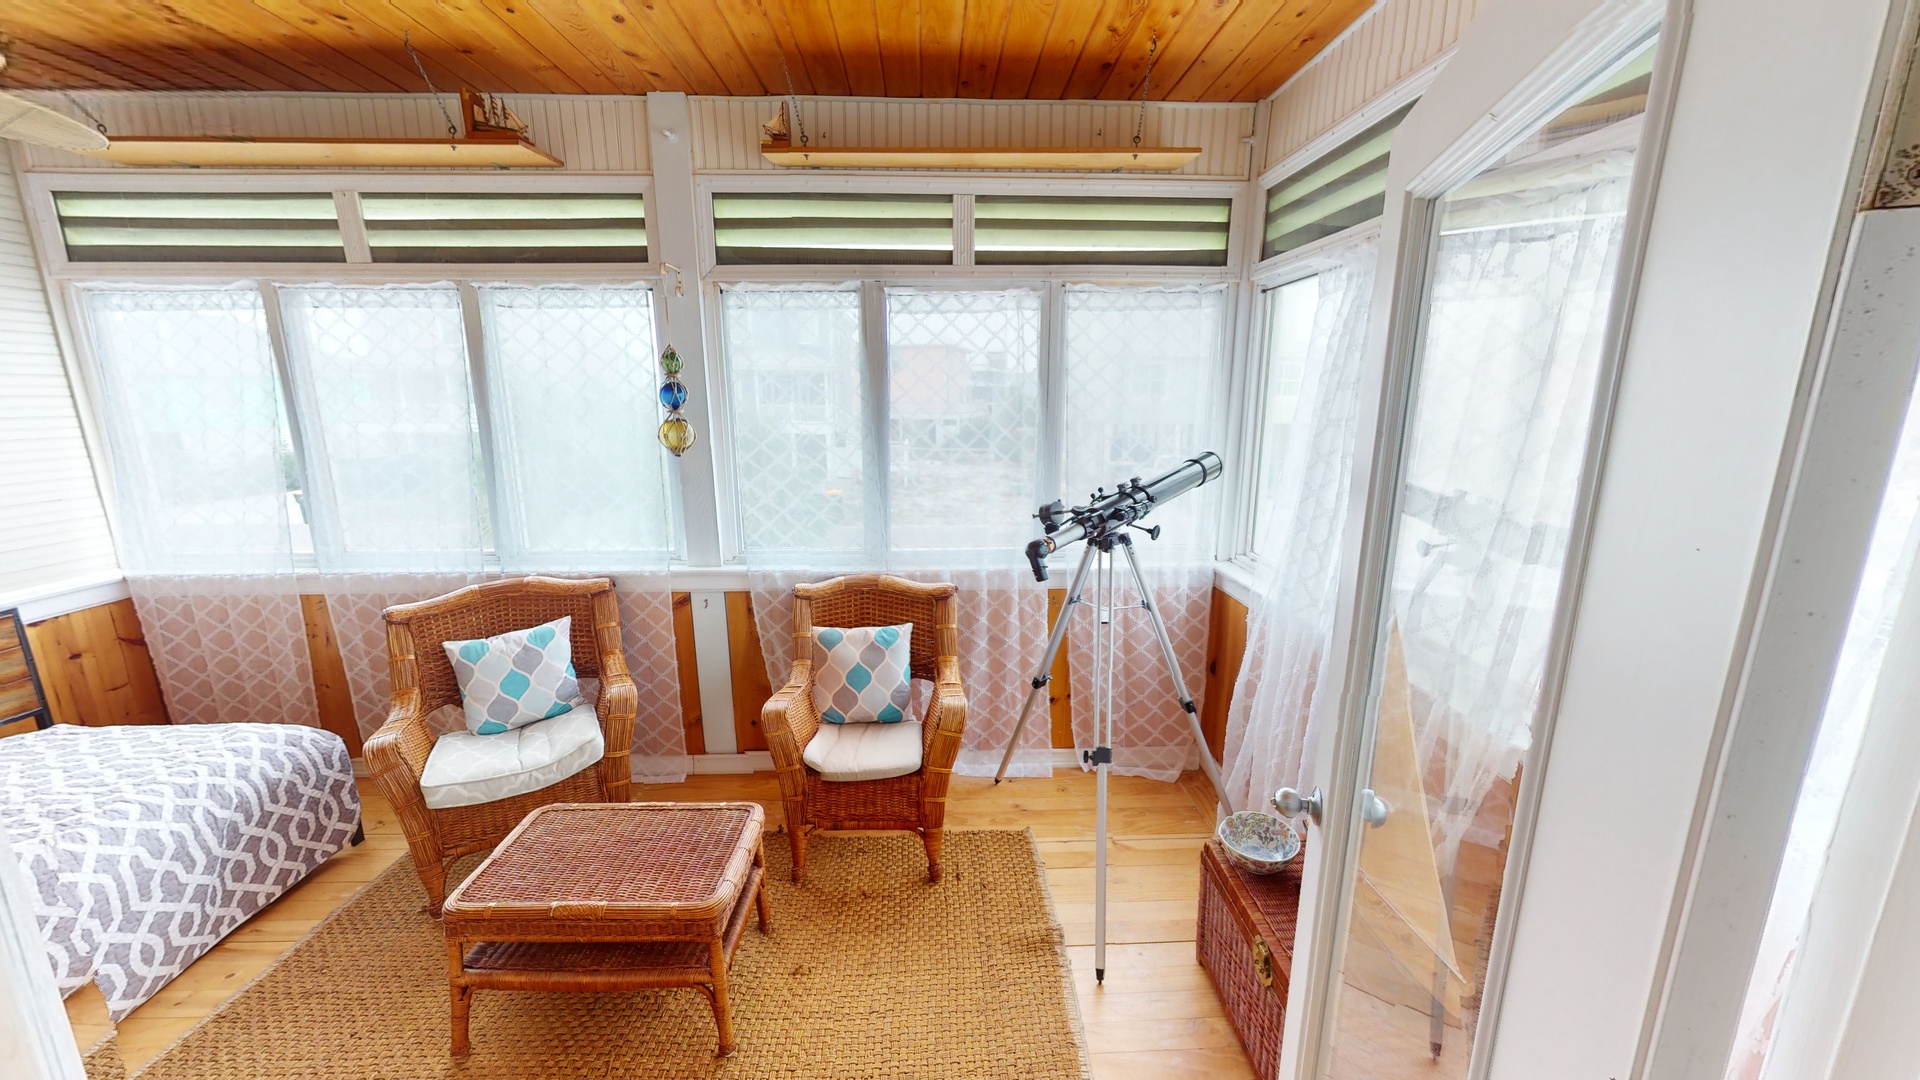 Enjoy some star-gazing from the sun room